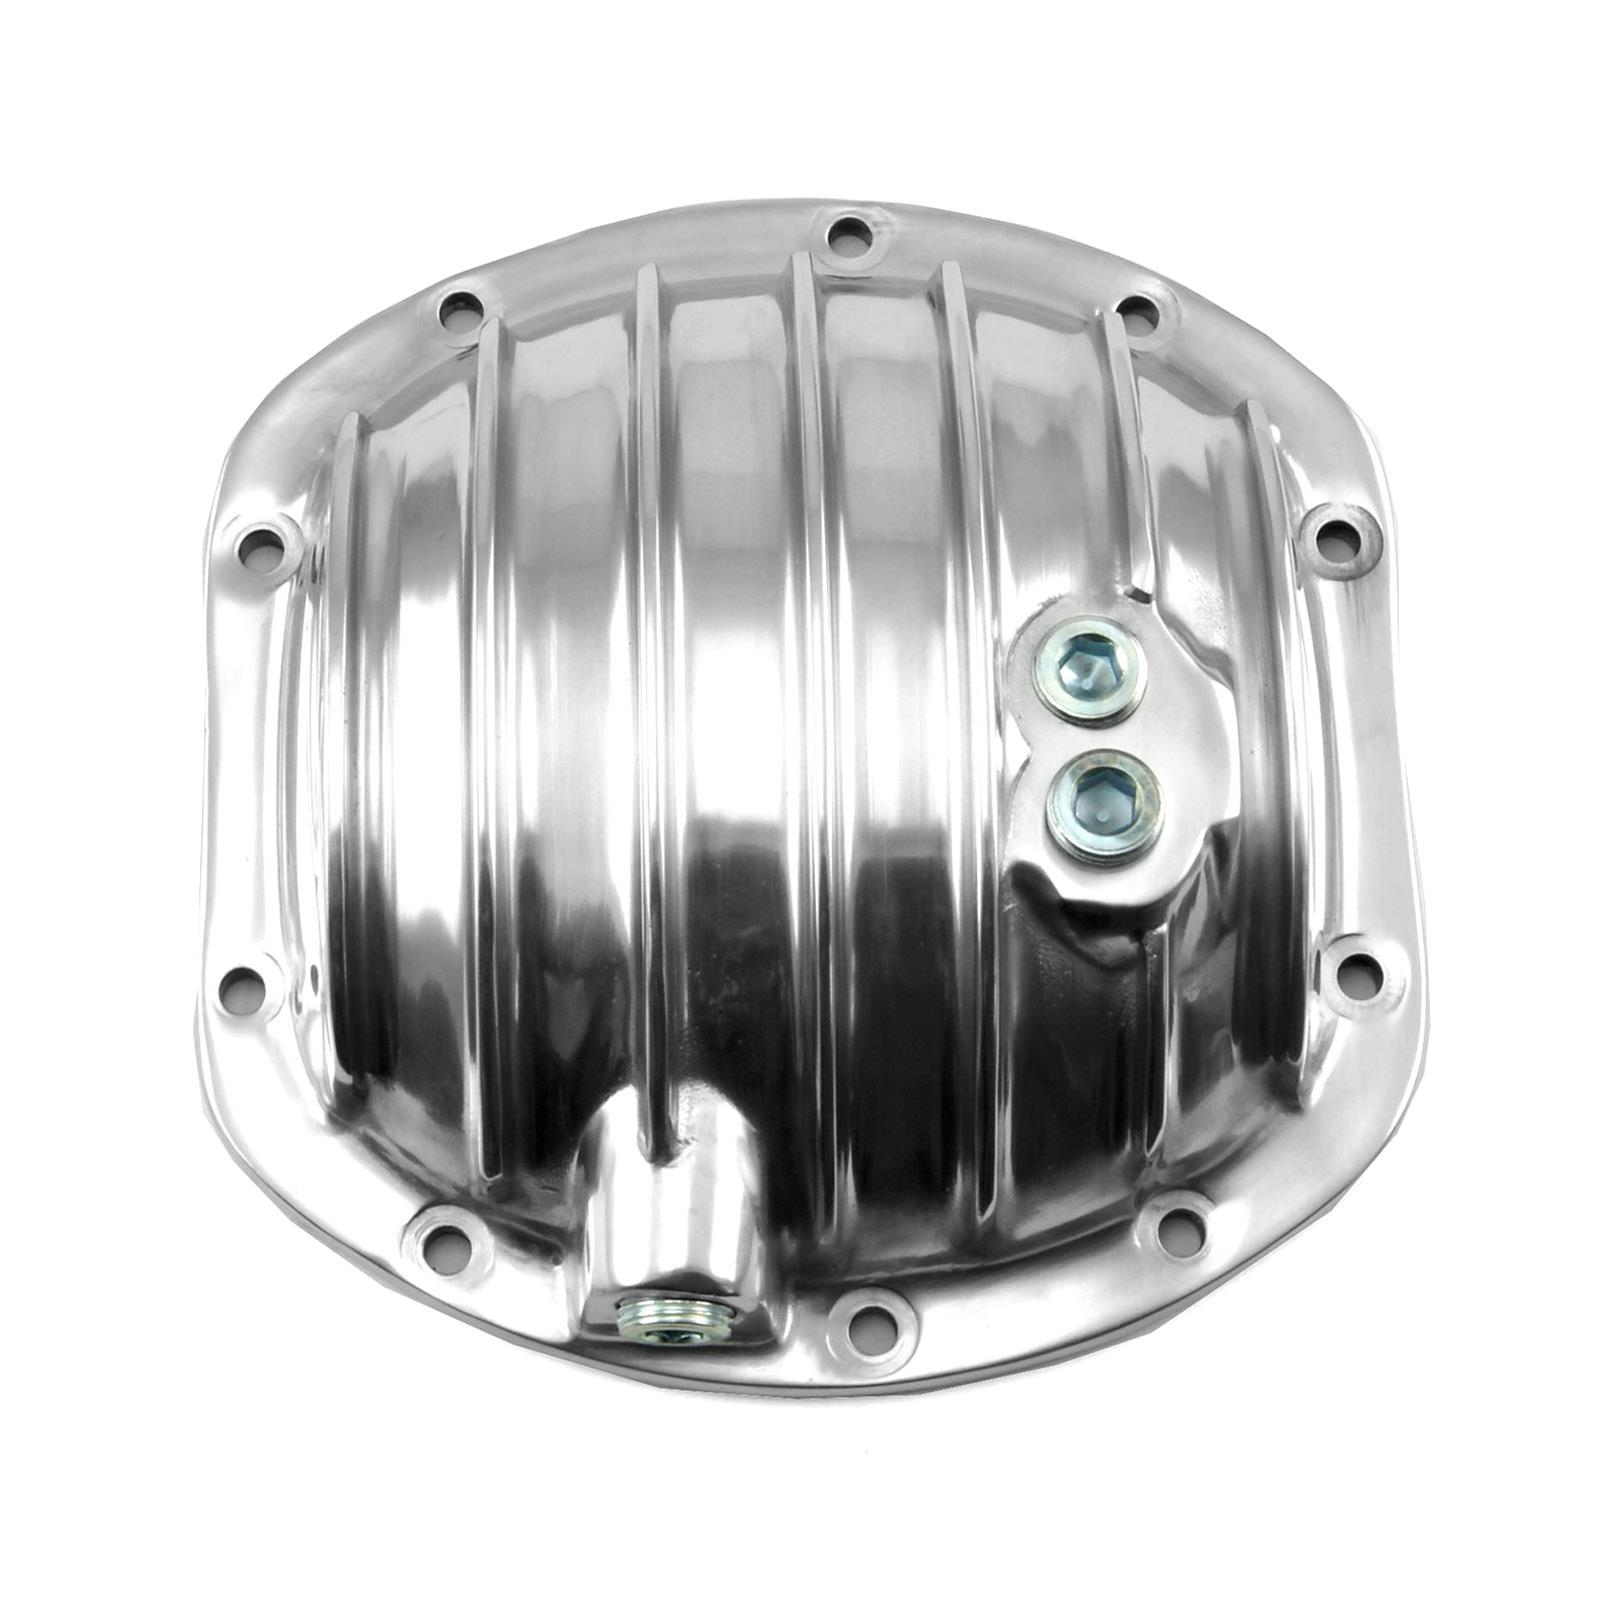 ALUMINUM DANA 25-27-30 DIFFERENTIAL COVER 10 BOLTS POLISHED 